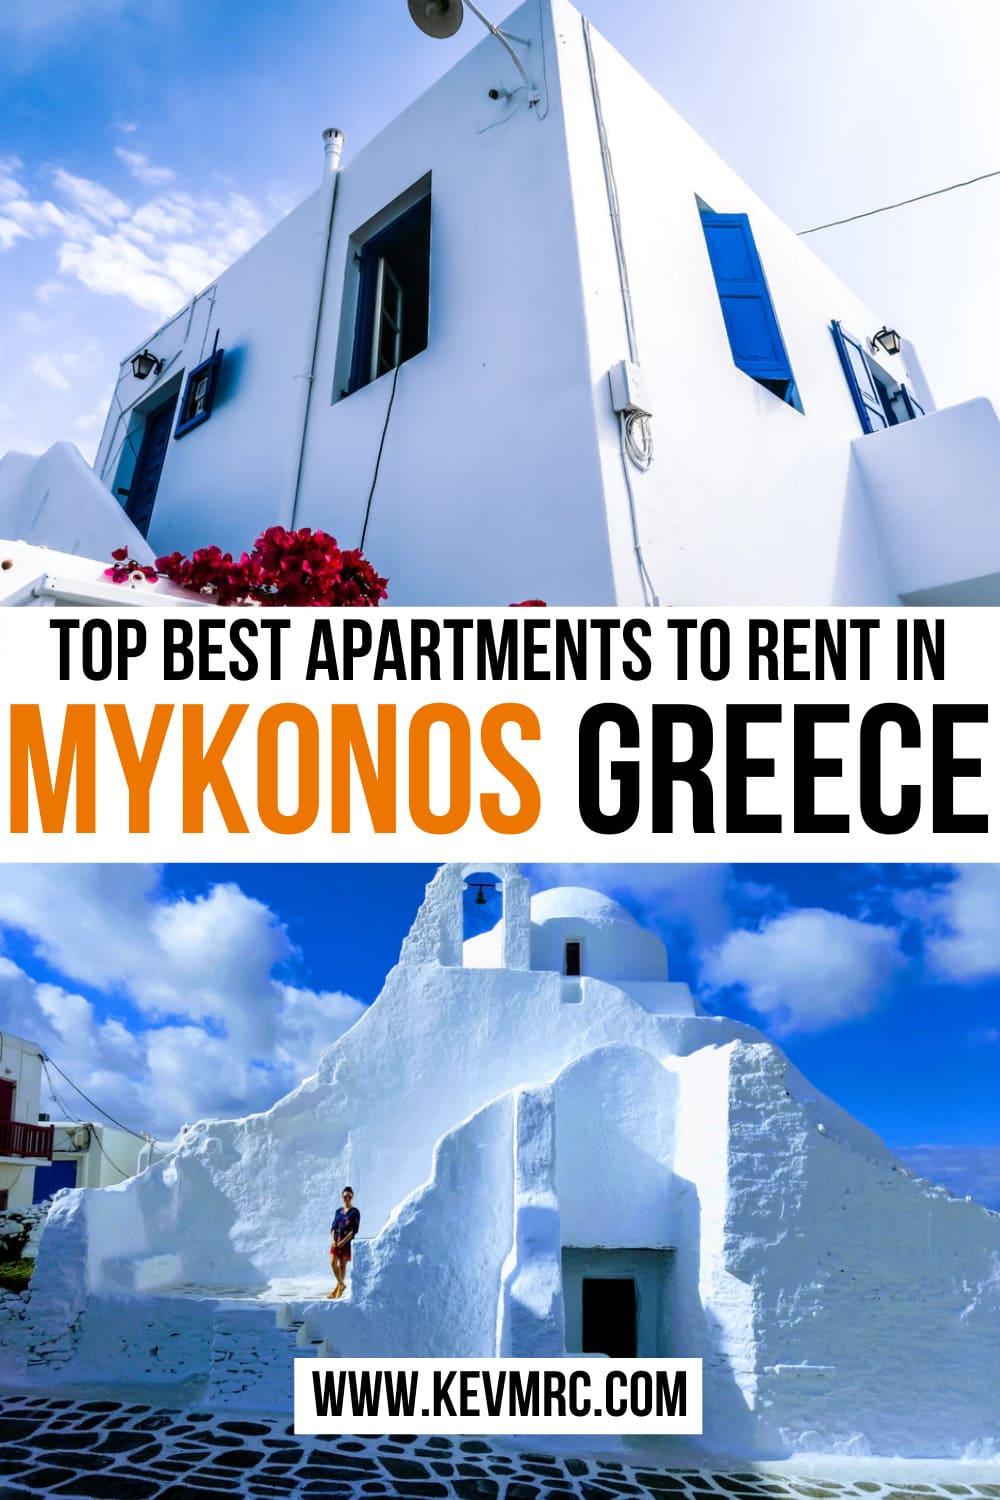 I’ve picked for you the 12 best Mykonos apartments to rent. Some are in the town of Mykonos, others are more luxurious or budget friendly. And of course, I've selected an overall best. mykonos apartment | mykonos villas | where to stay in mykonos greece